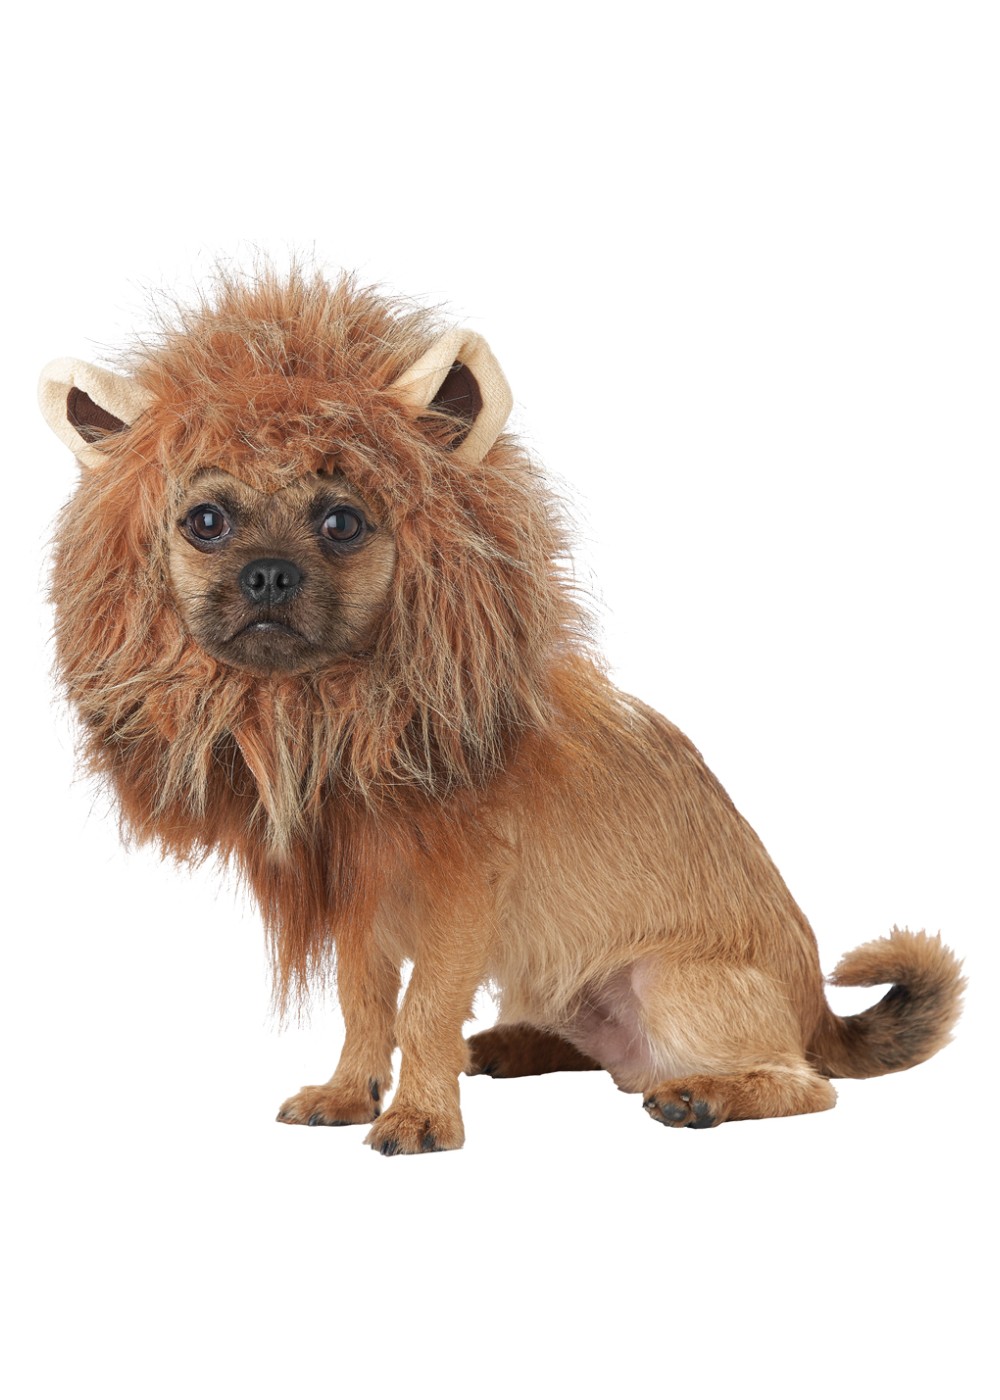 King Of The Jungle Pet Costume